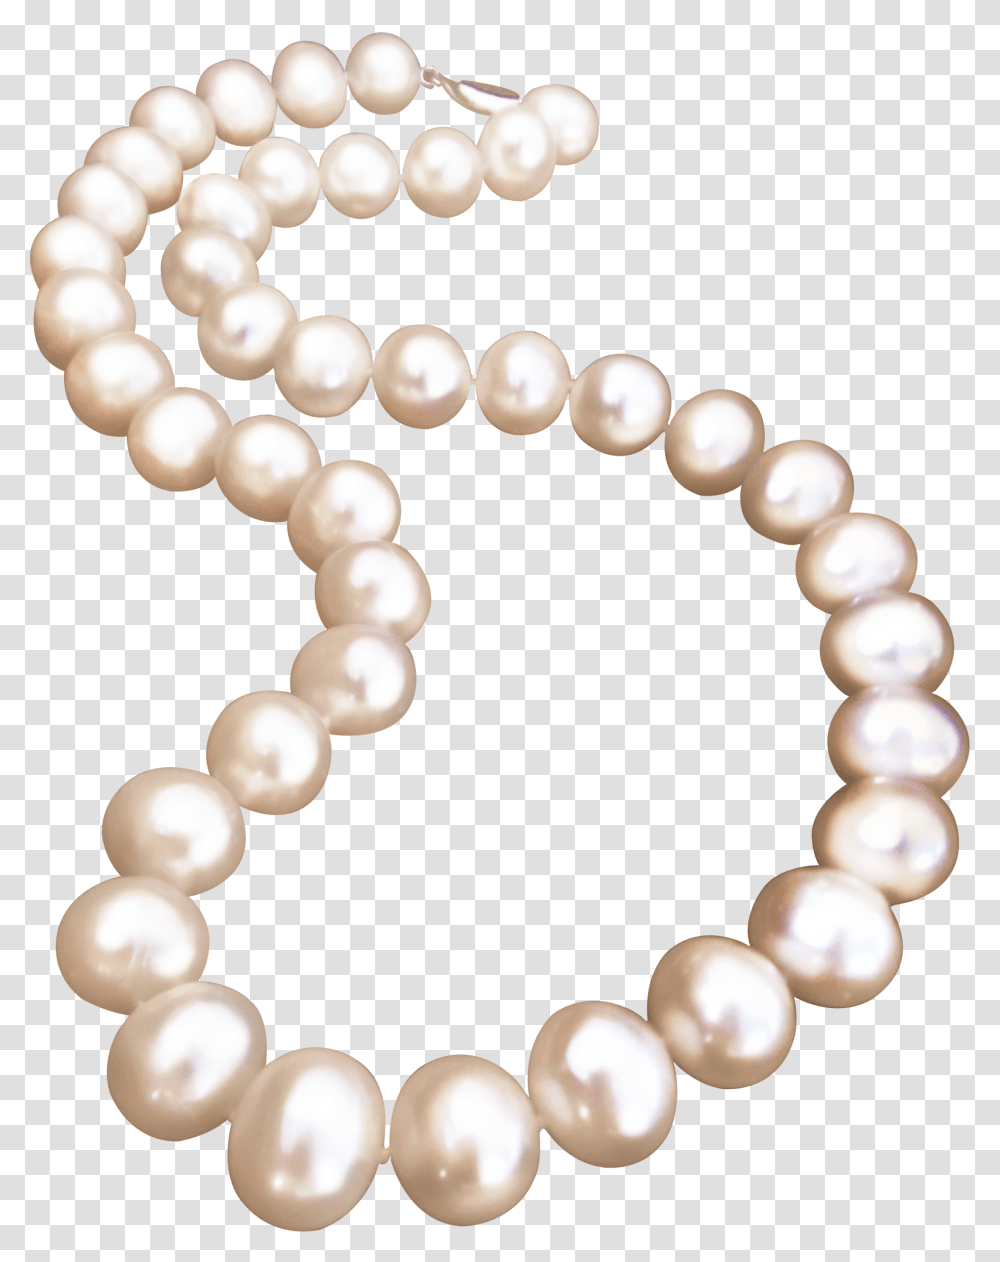 Pearl Necklace Jewellery Pearl Necklace Free Pearl Necklace, Jewelry, Accessories, Accessory Transparent Png